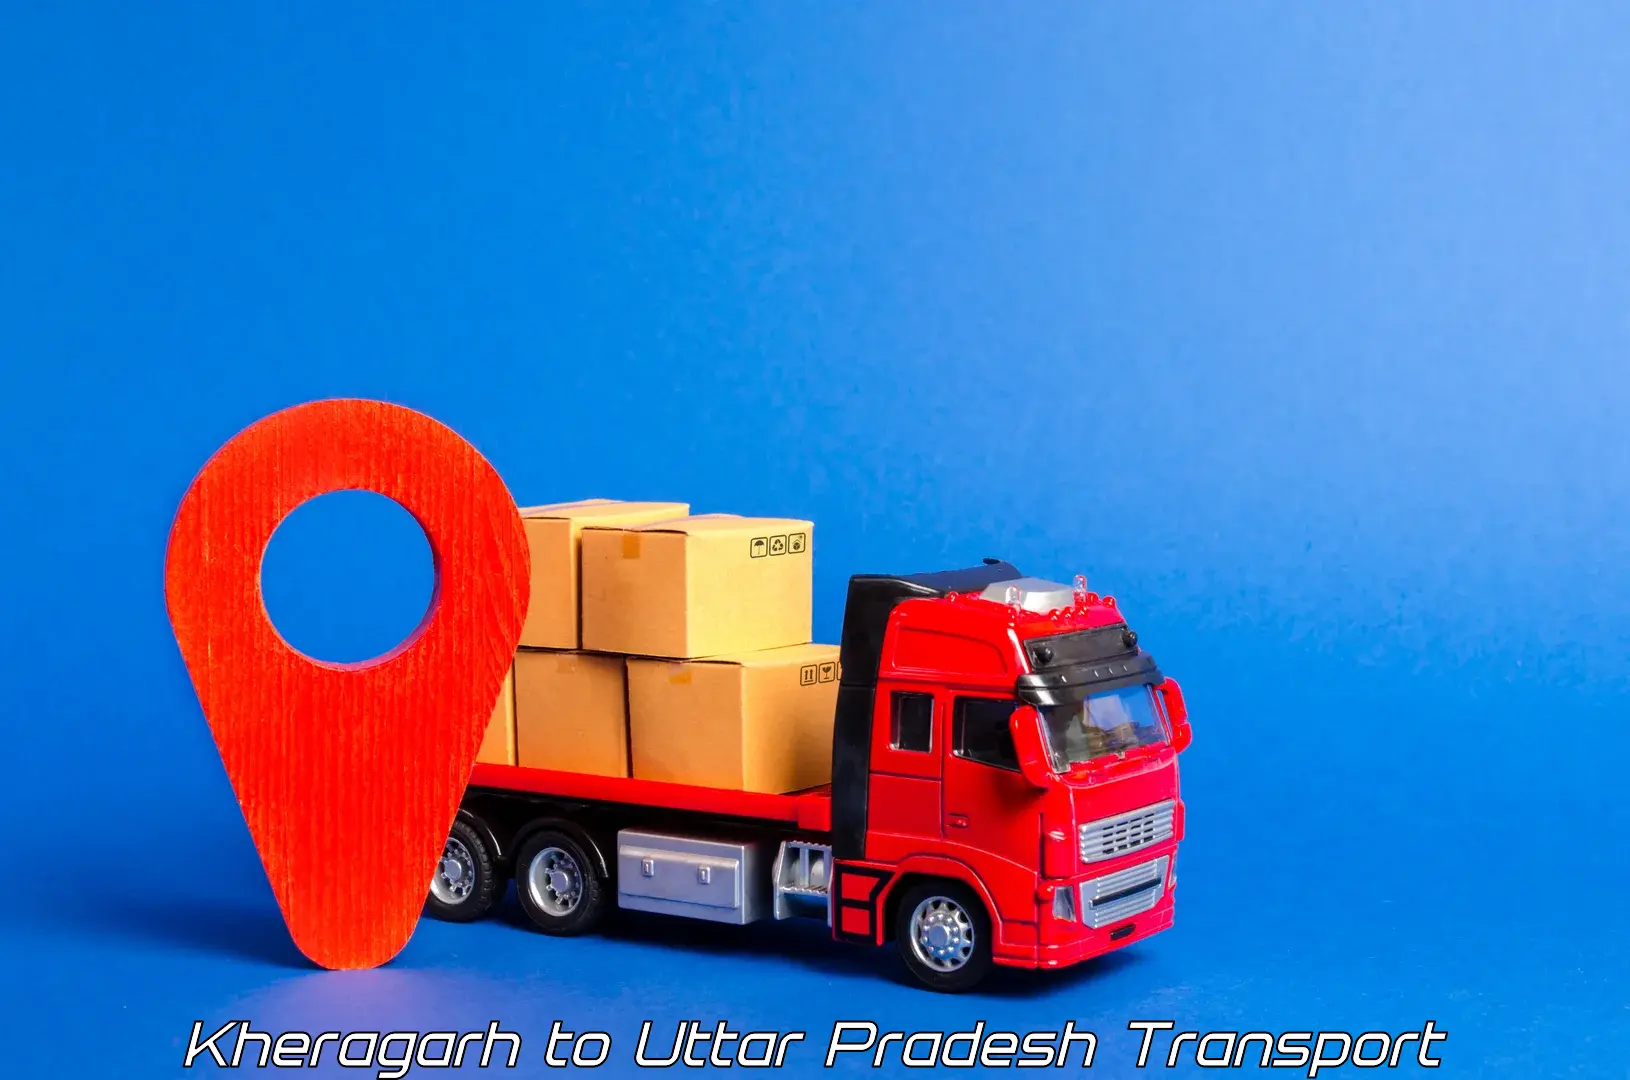 Container transport service Kheragarh to Agra